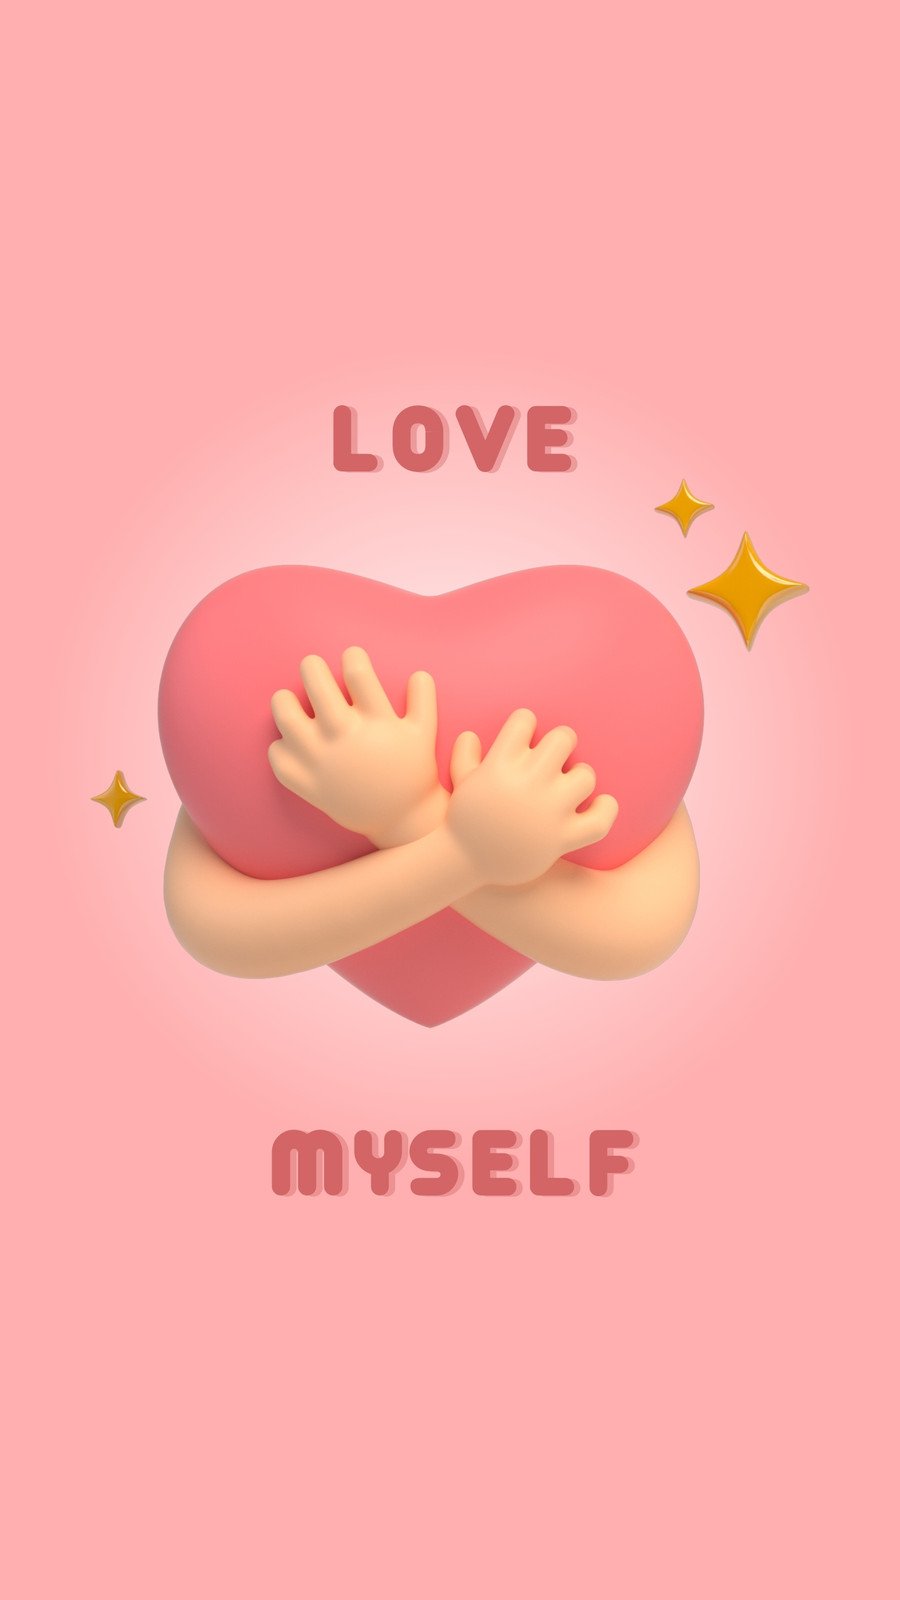 Love myself wallpaper by ConfusedBrother  Download on ZEDGE  9801